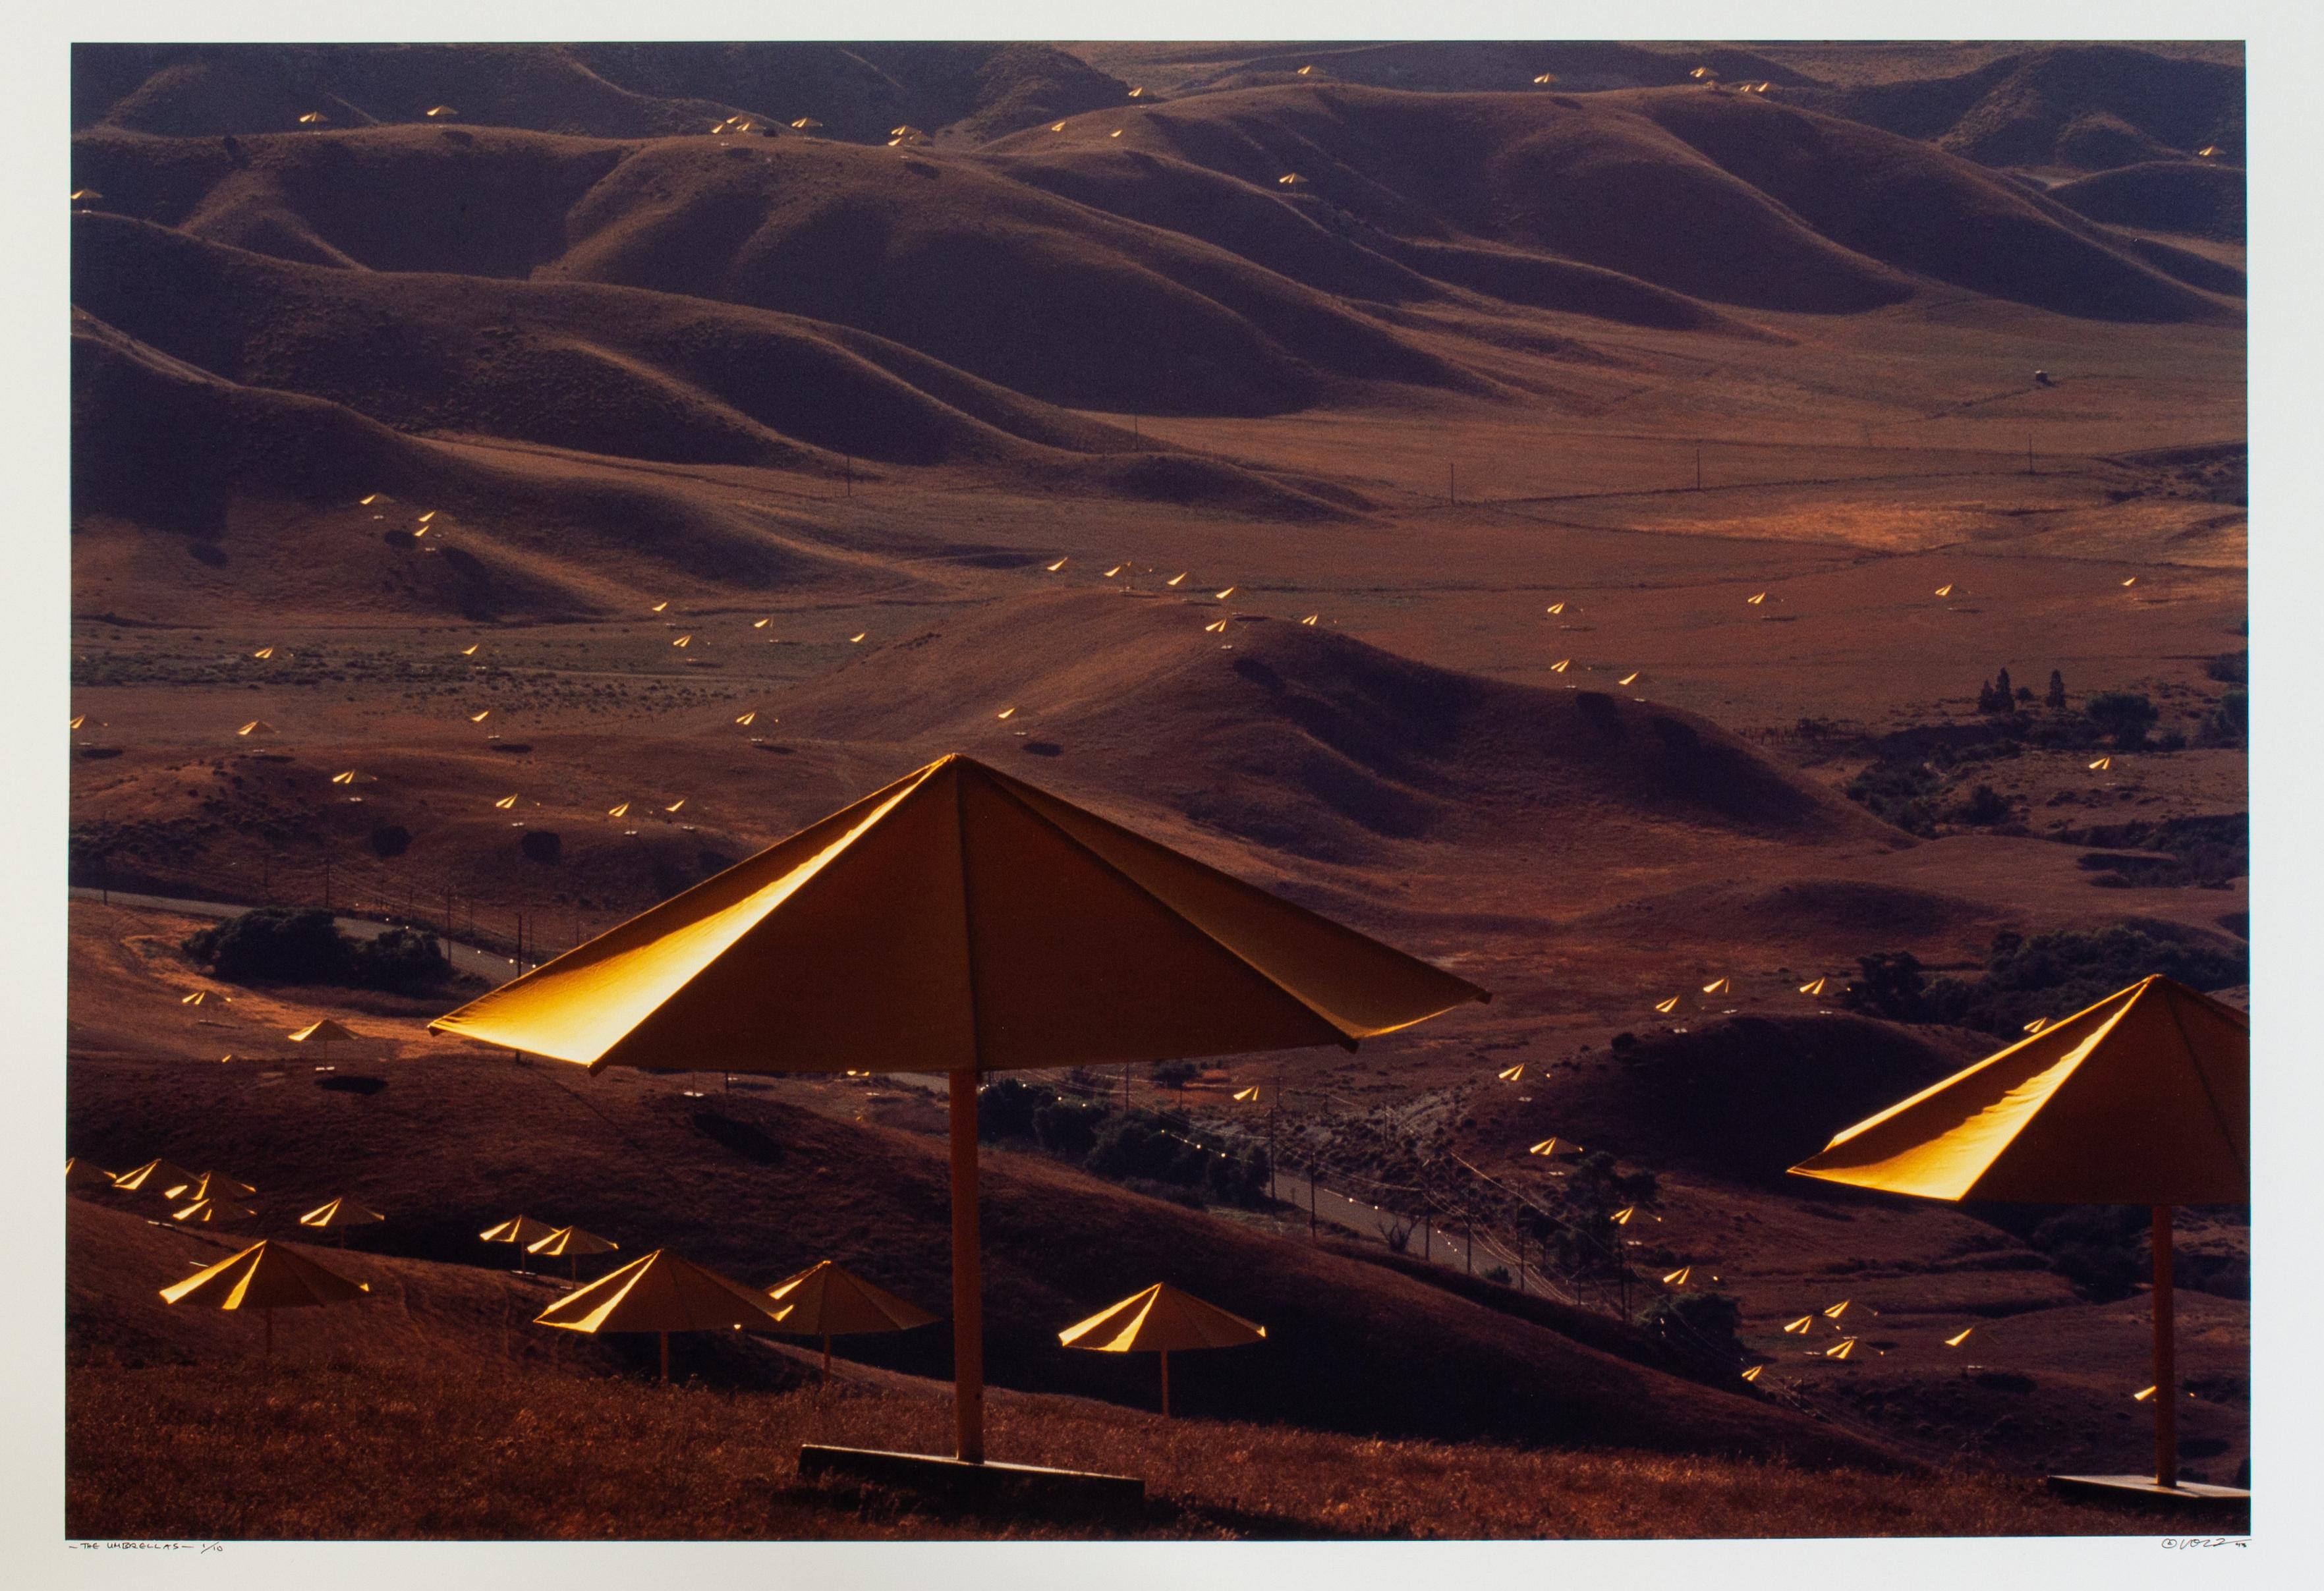 Wolfgang Volz, the Umbrellas, Project Christo & Jeanne Claude, Limited Edition For Sale